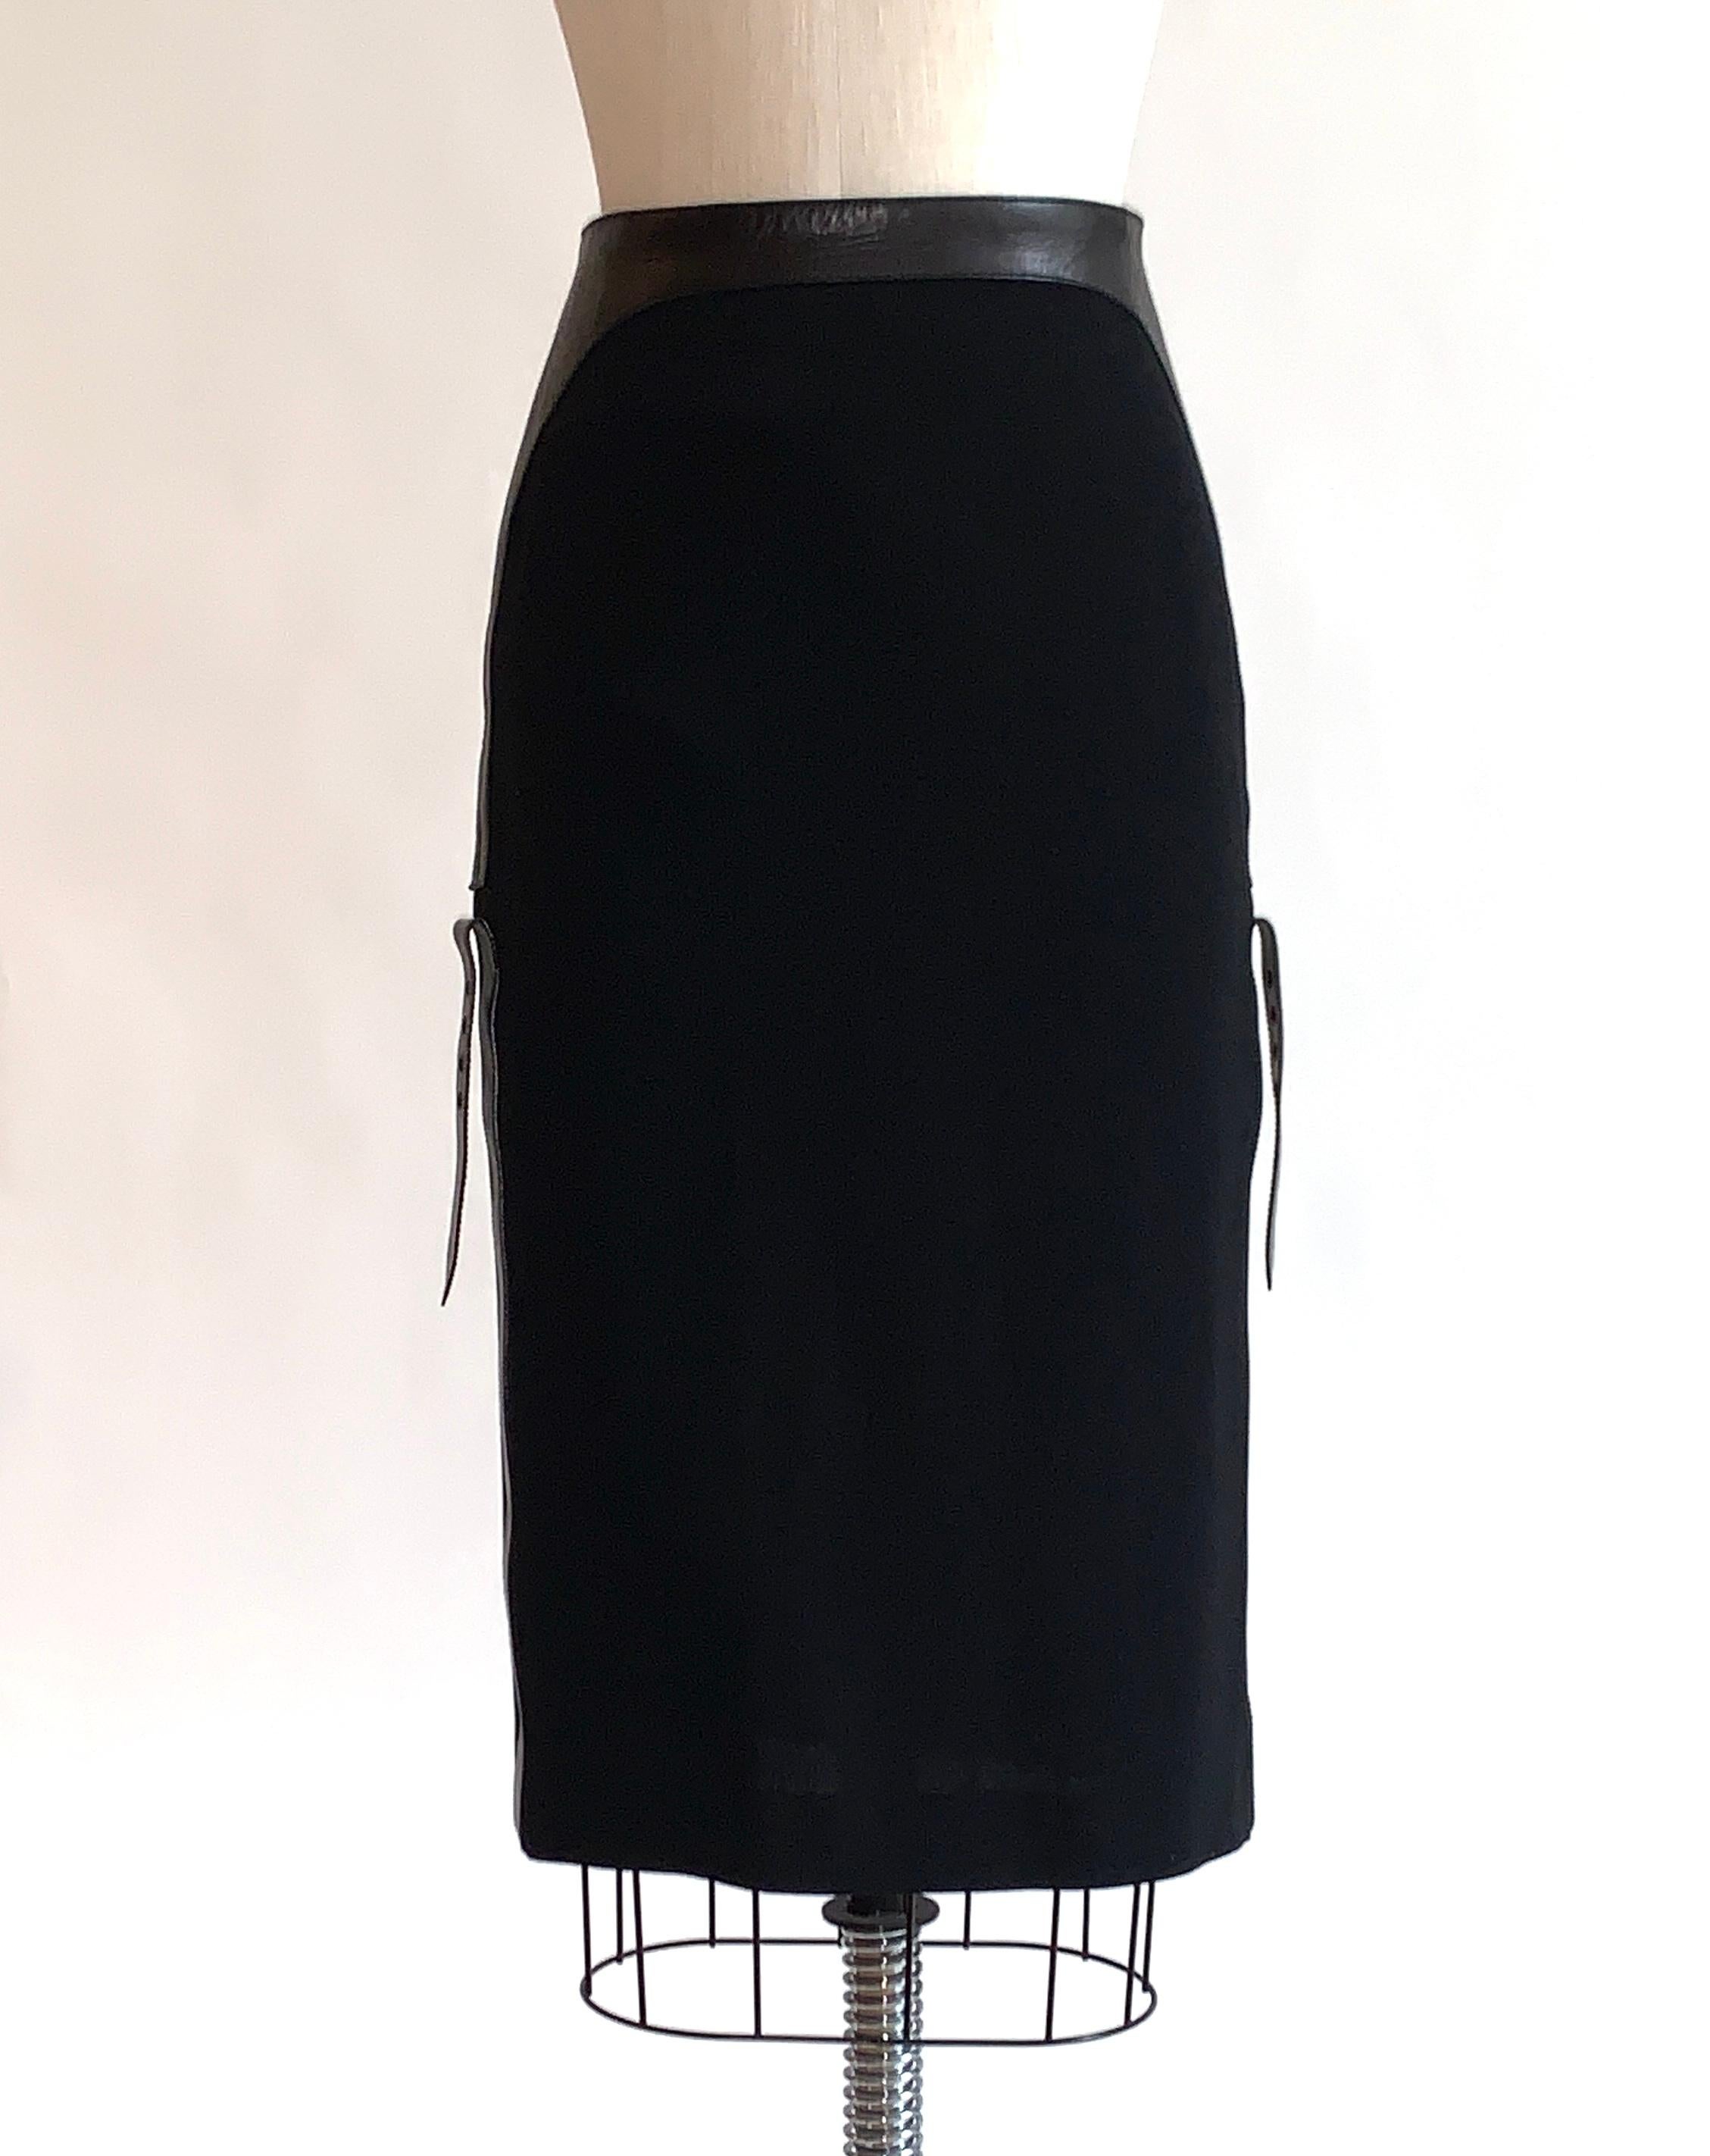 Alexander McQueen black pencil skirt with leather accent at waist that descends into straps at side.  Zip at back waist, slit at back center.

90% wool, 10% leather.
Fully lined in 100% rayon.

Made in Italy.

Size Italian 40, approximate US 4. See